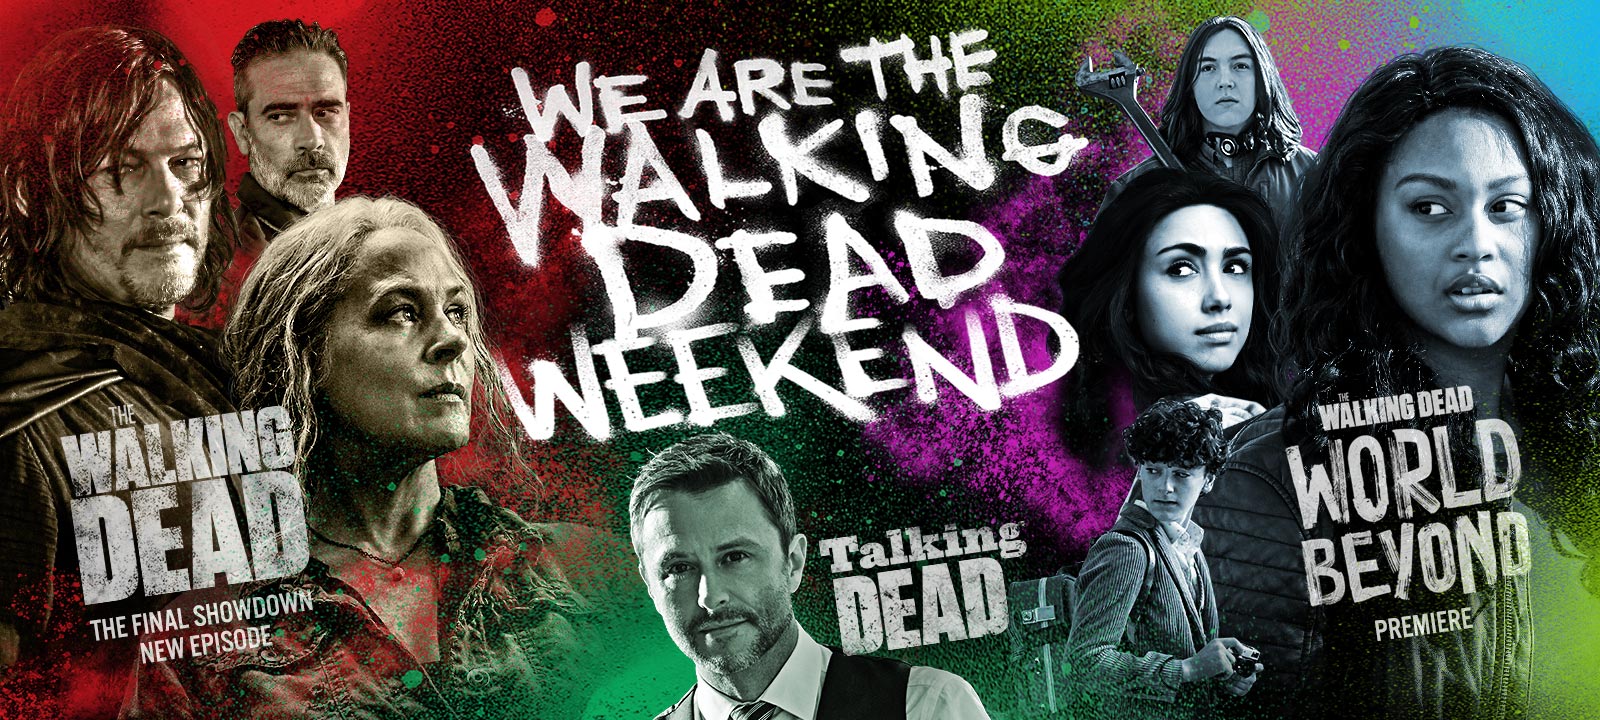 Download We Are The Walking Dead Weekend Amc